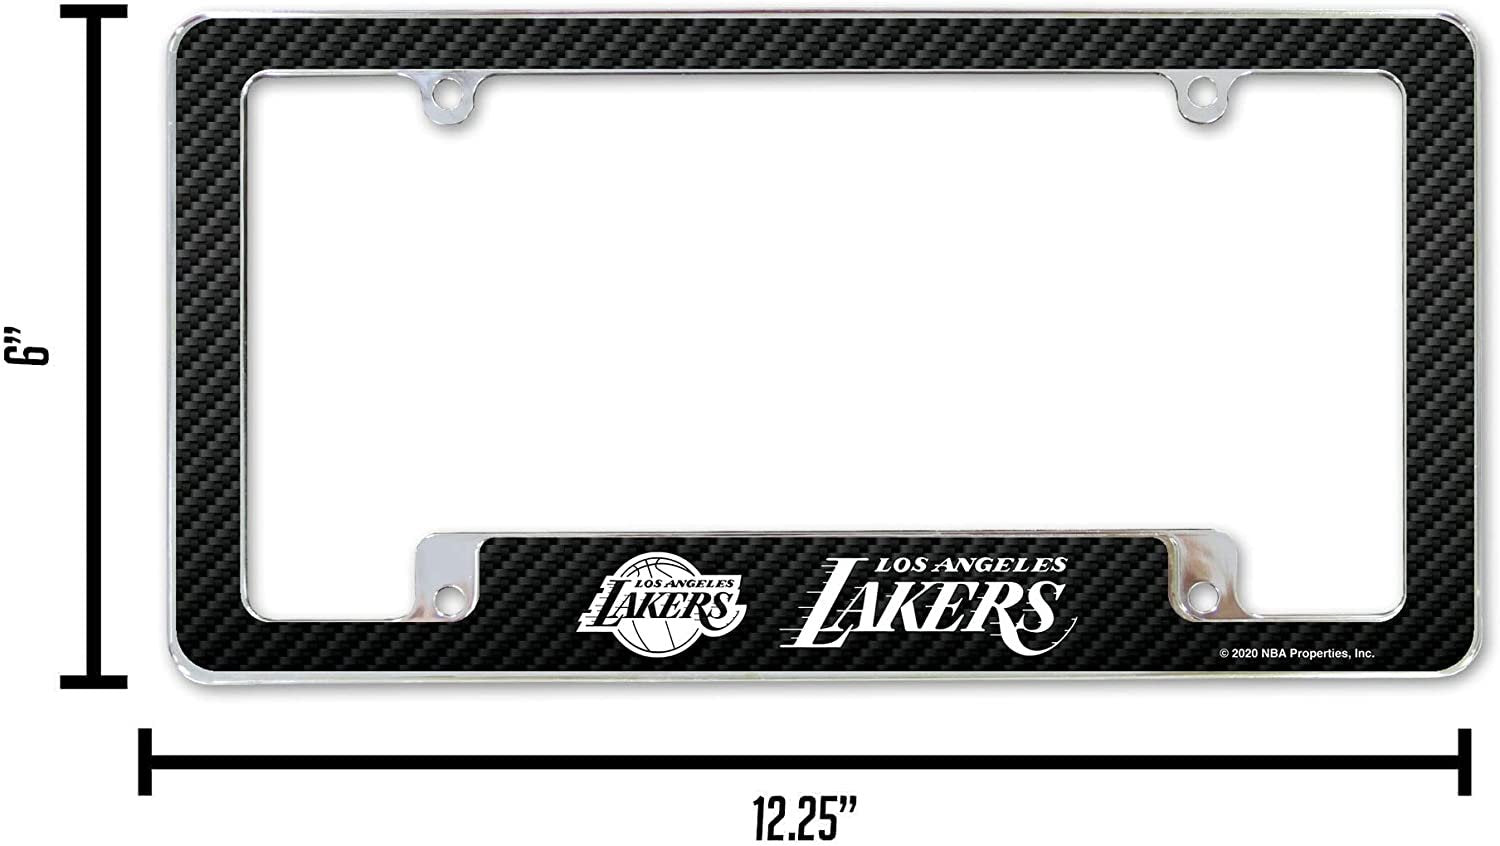 Los Angeles Lakers Metal License Plate Frame Chrome Tag Cover Carbon Fiber Design 6x12 Inch